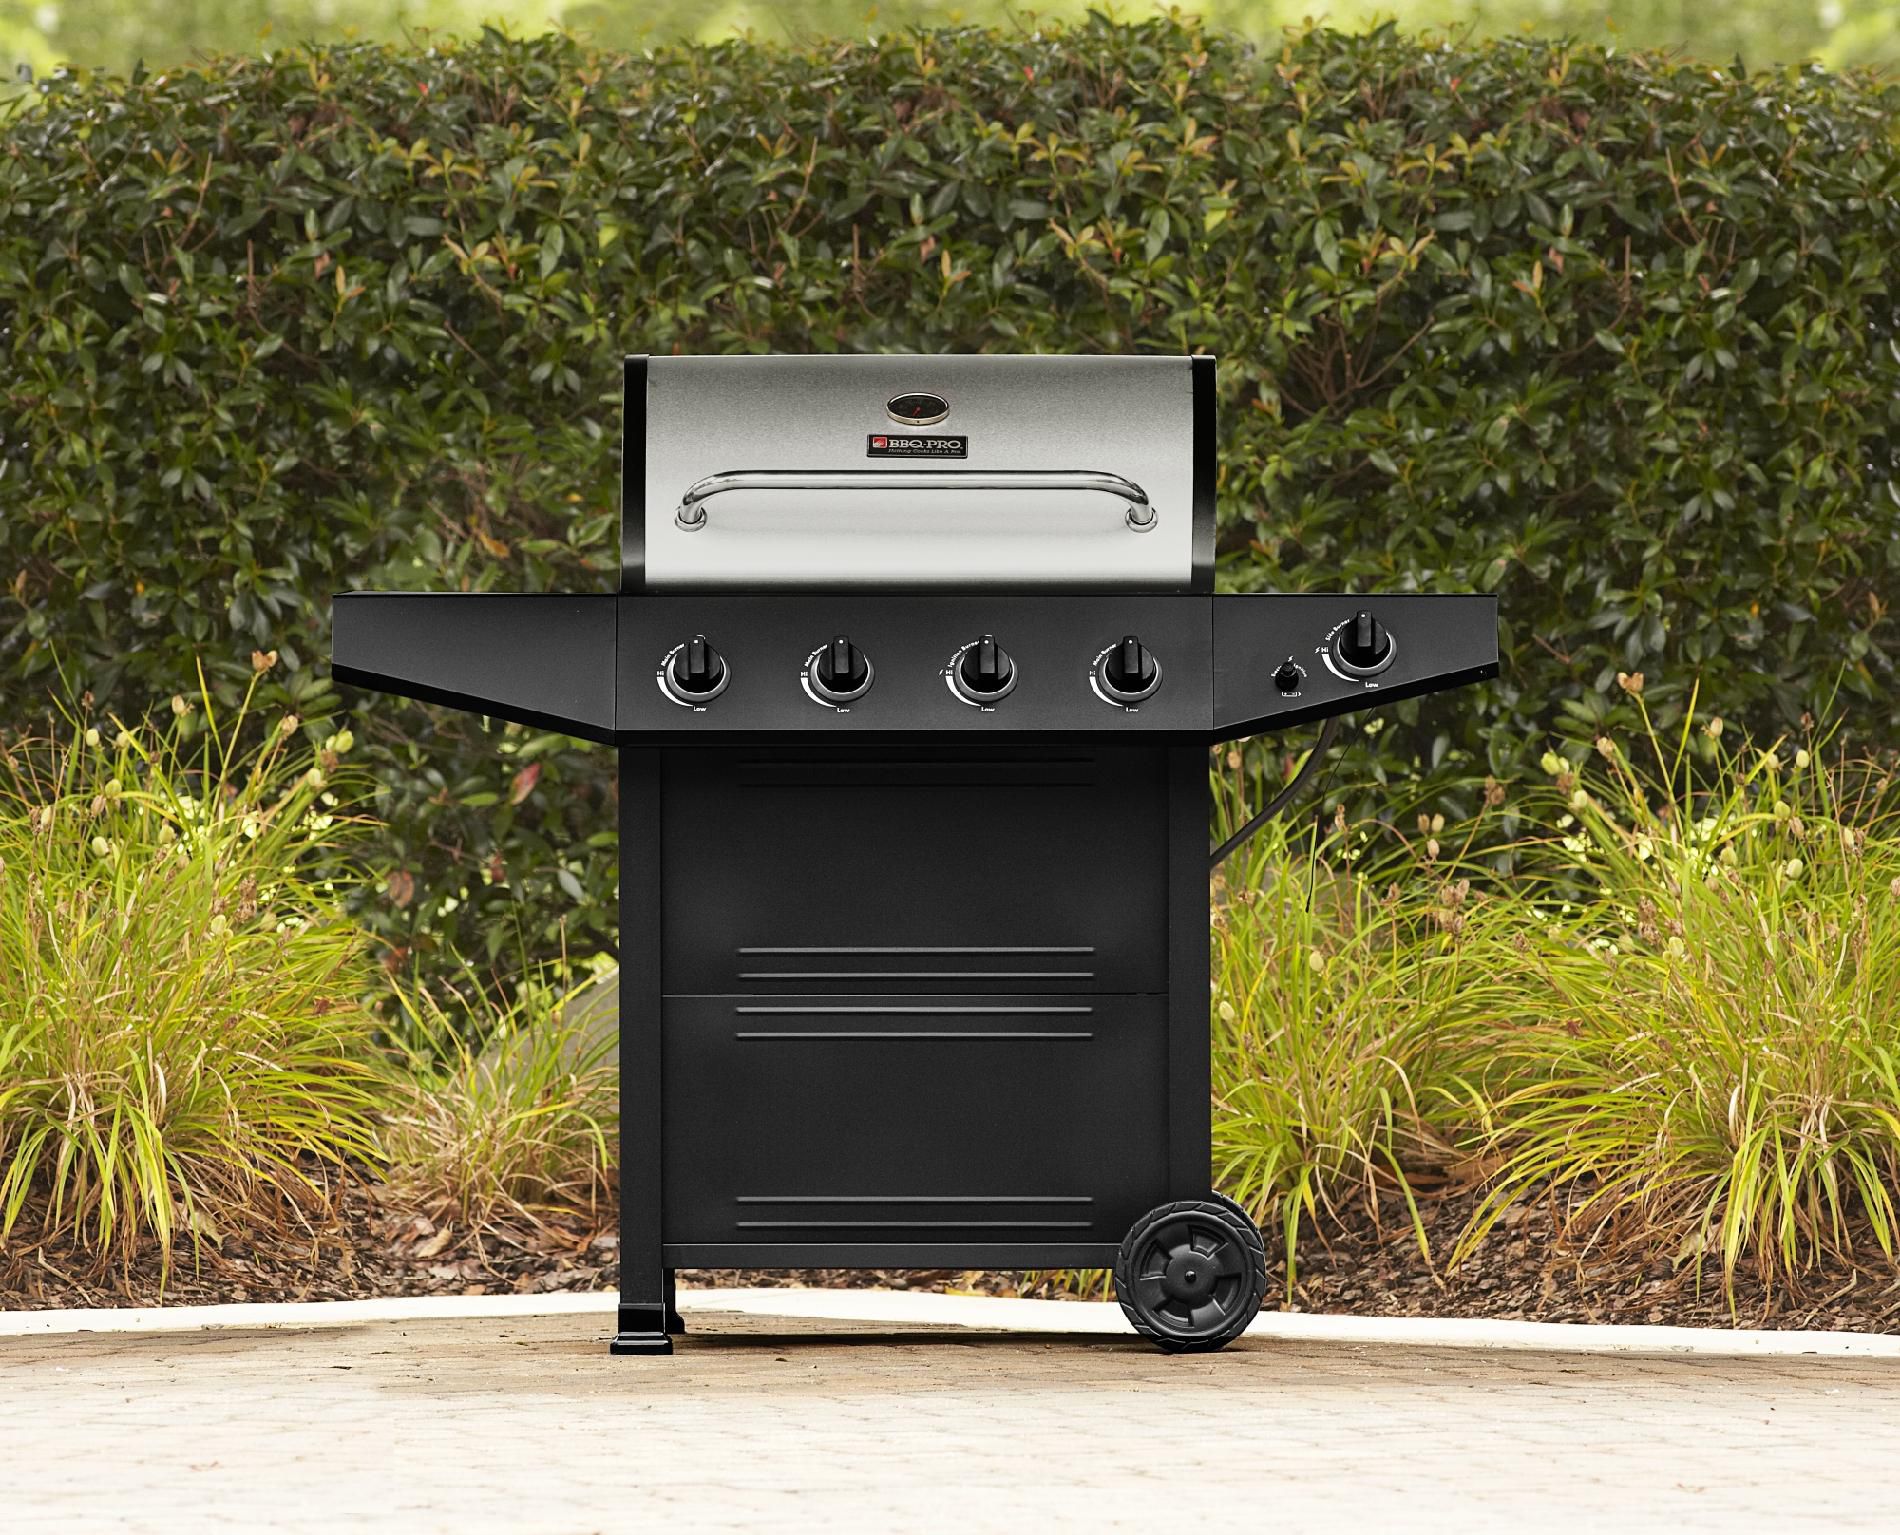 BBQ Pro 4 Burner Gas Grill with Stainless Steel Lid - PERFECTGLO, INC